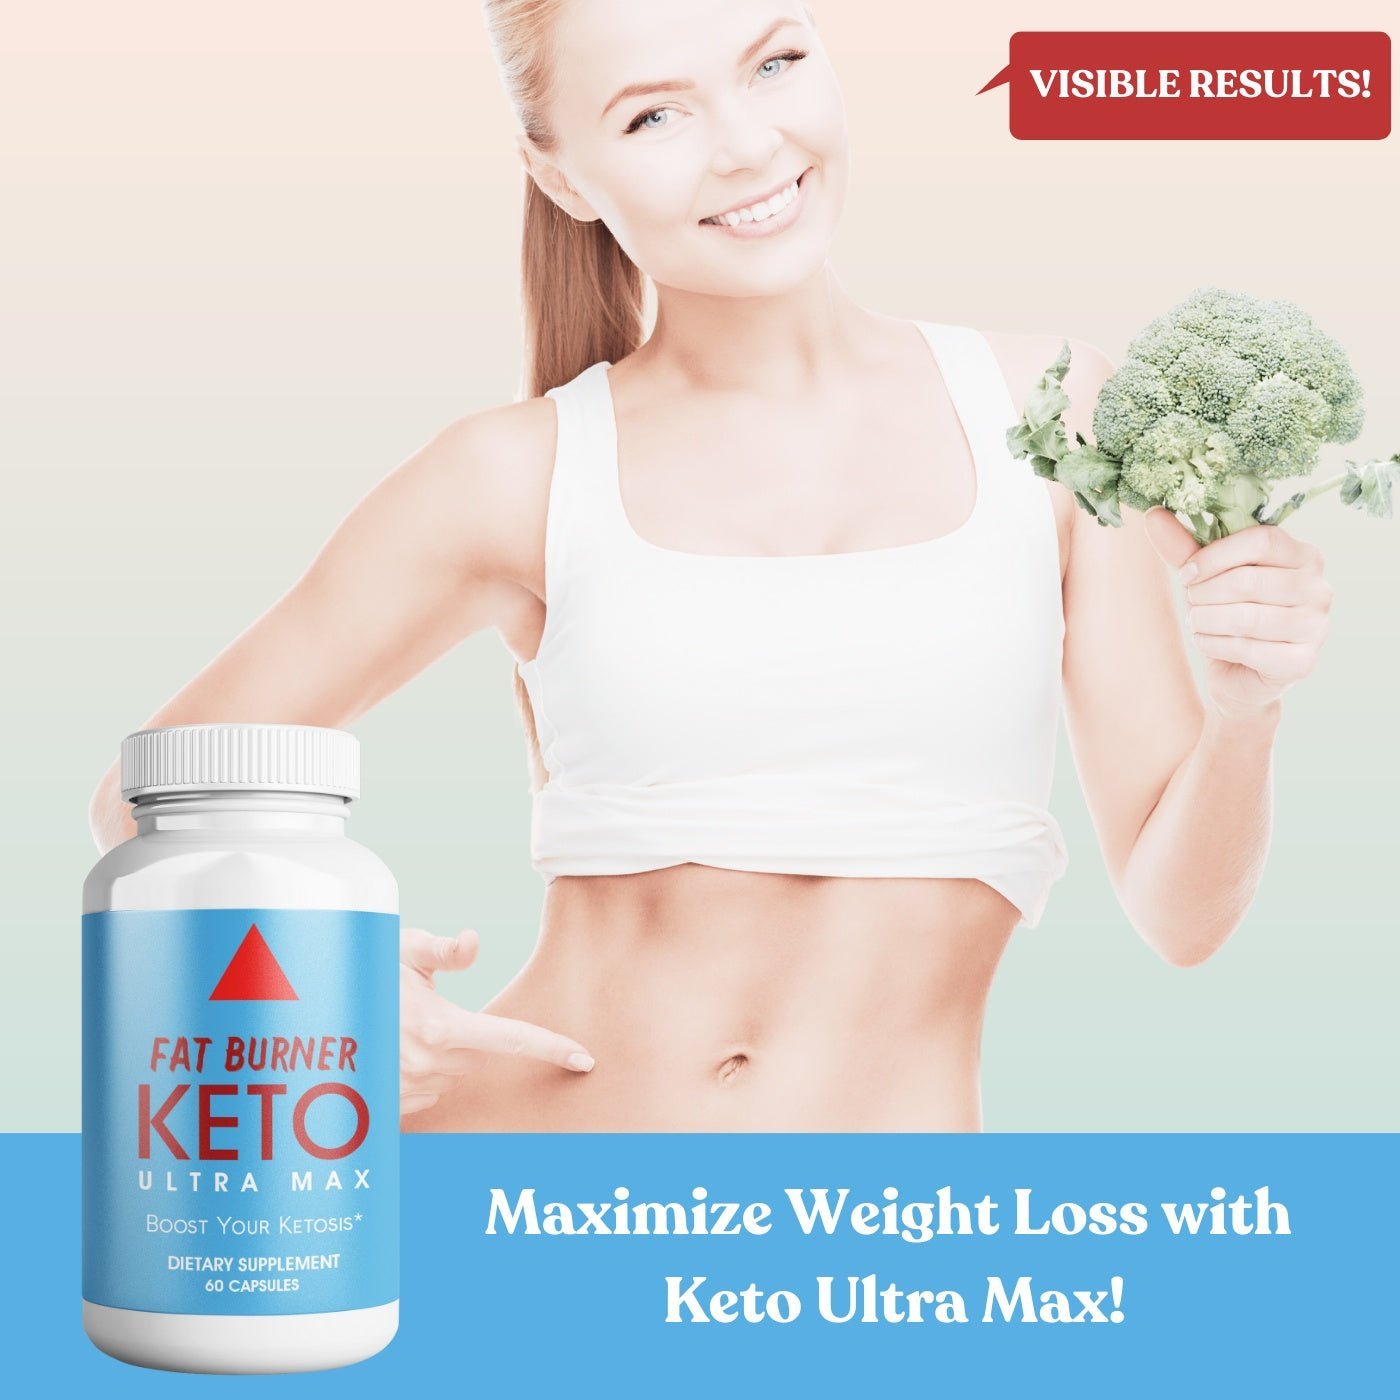 Keto Ultra Max: Advanced Weight Management, Boost Energy, Focus | 2-Pack - Herblif Nutrition USA